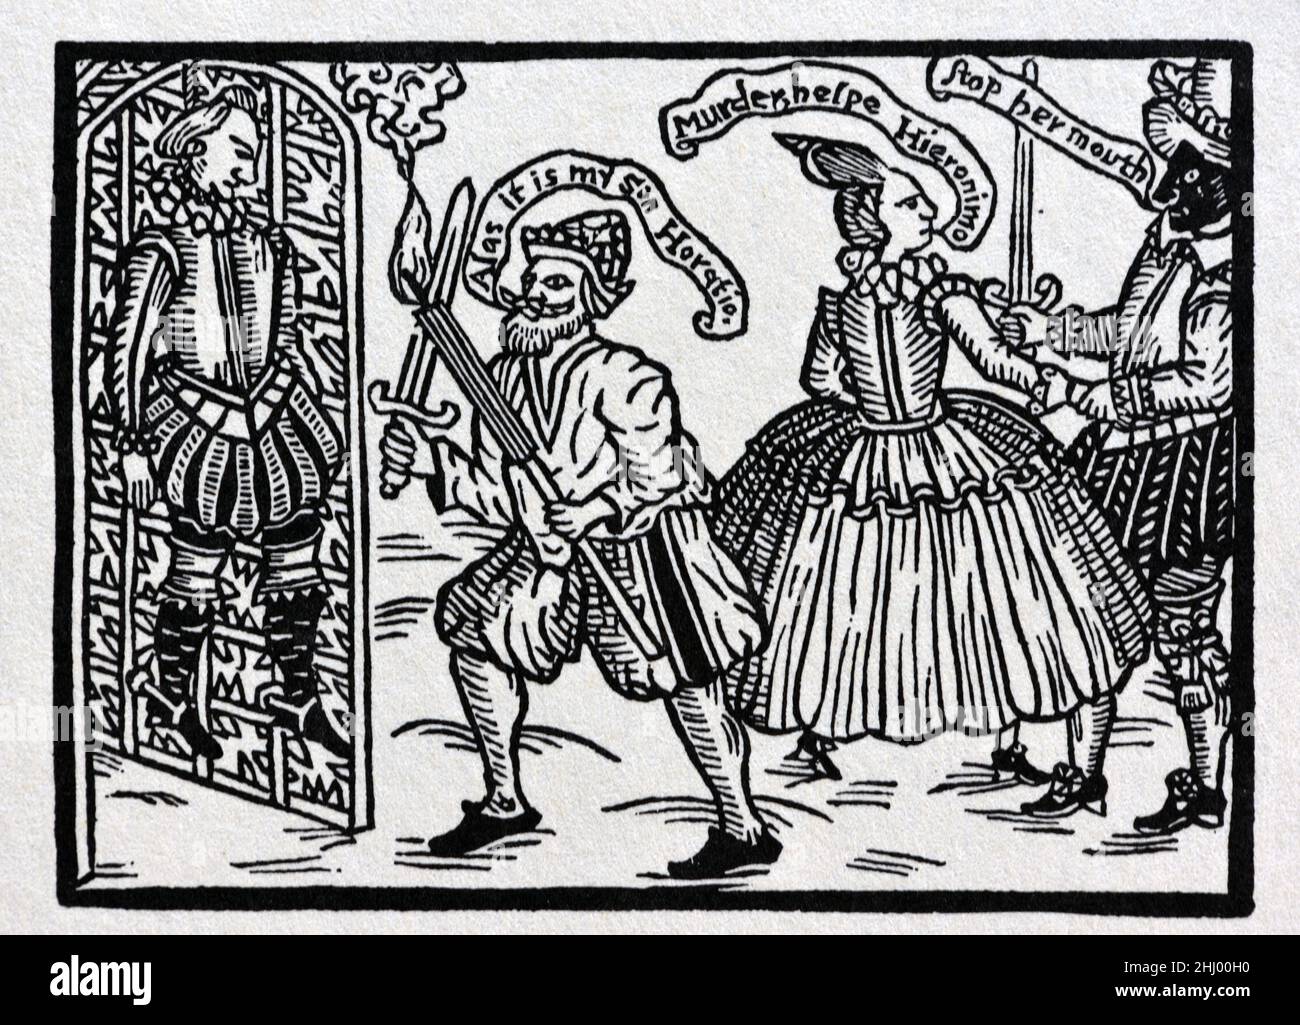 Woodcut Book Cover of a 1615 edition of The Spanish Tragedy by Thomas Kyd. The illustration shows Don Hieromino, Knight Marshal of Spain, and his Wife Isabella, discovering the murdered, hanged and stabbed body of their son Don Horatio. Vintage Woodcut Print, Engraving or Illustration Stock Photo